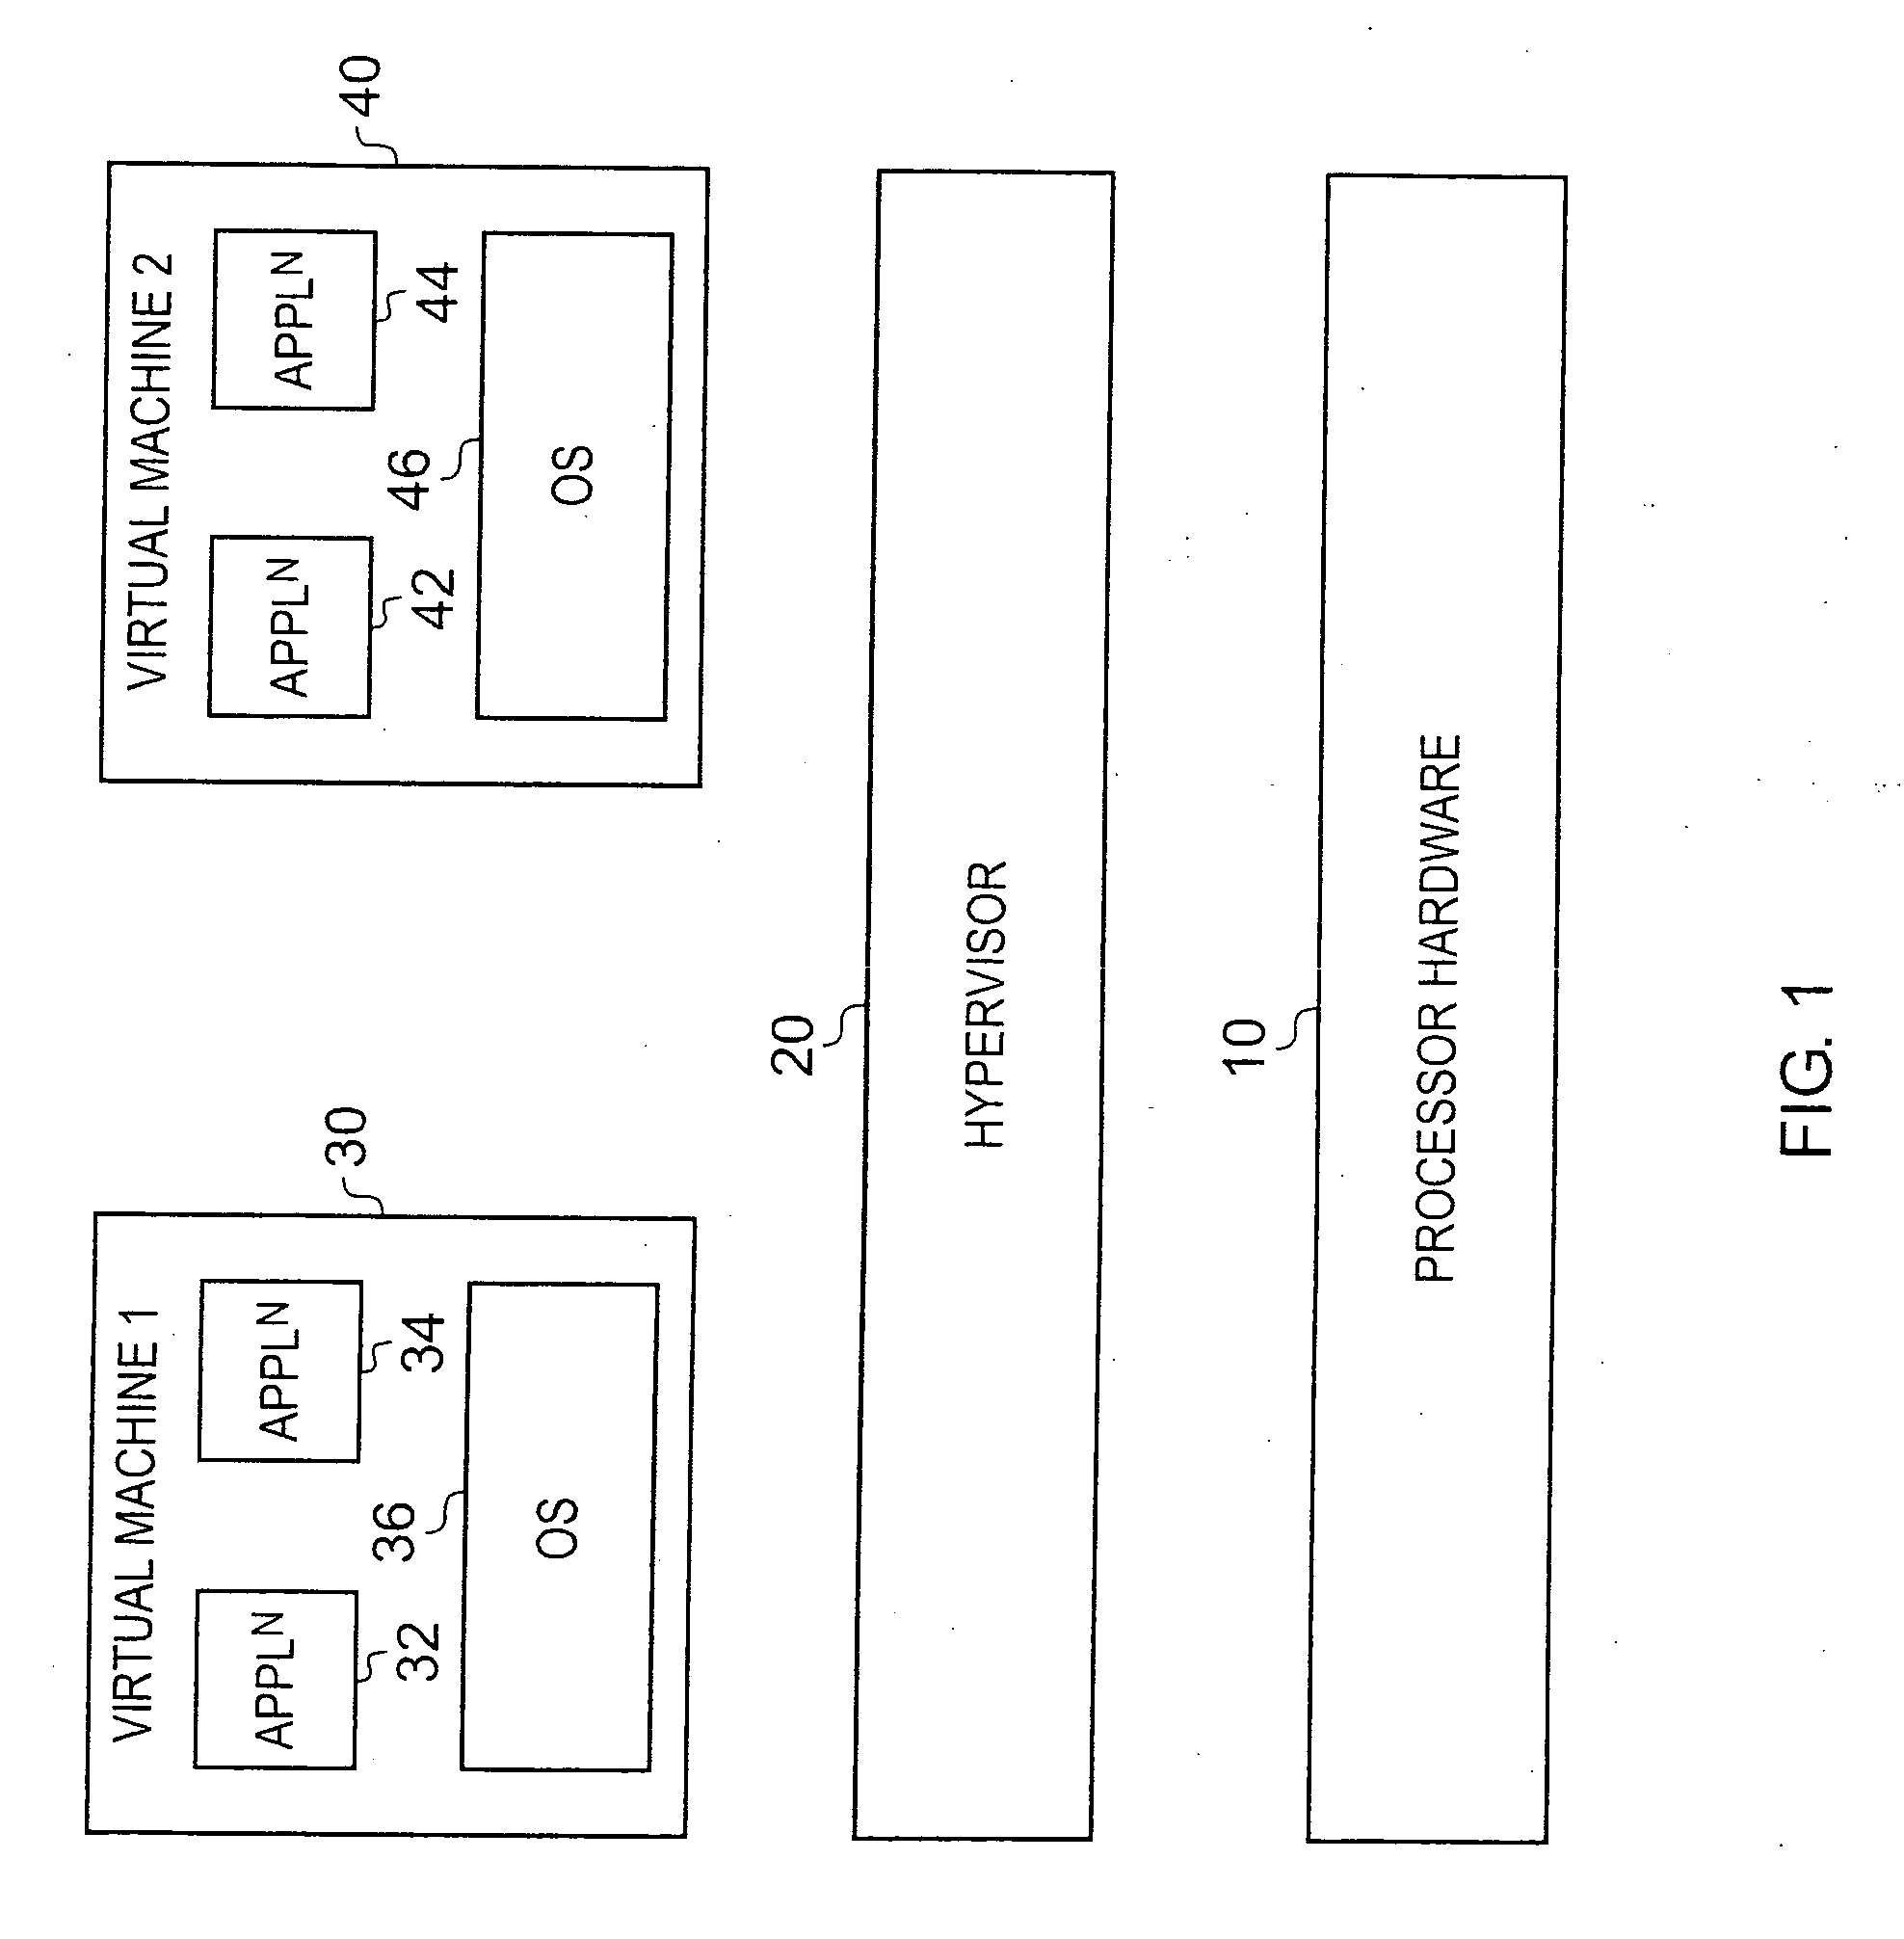 Data processing apparatus and method for controlling access to secure memory by virtual machines executing on processing circuirty